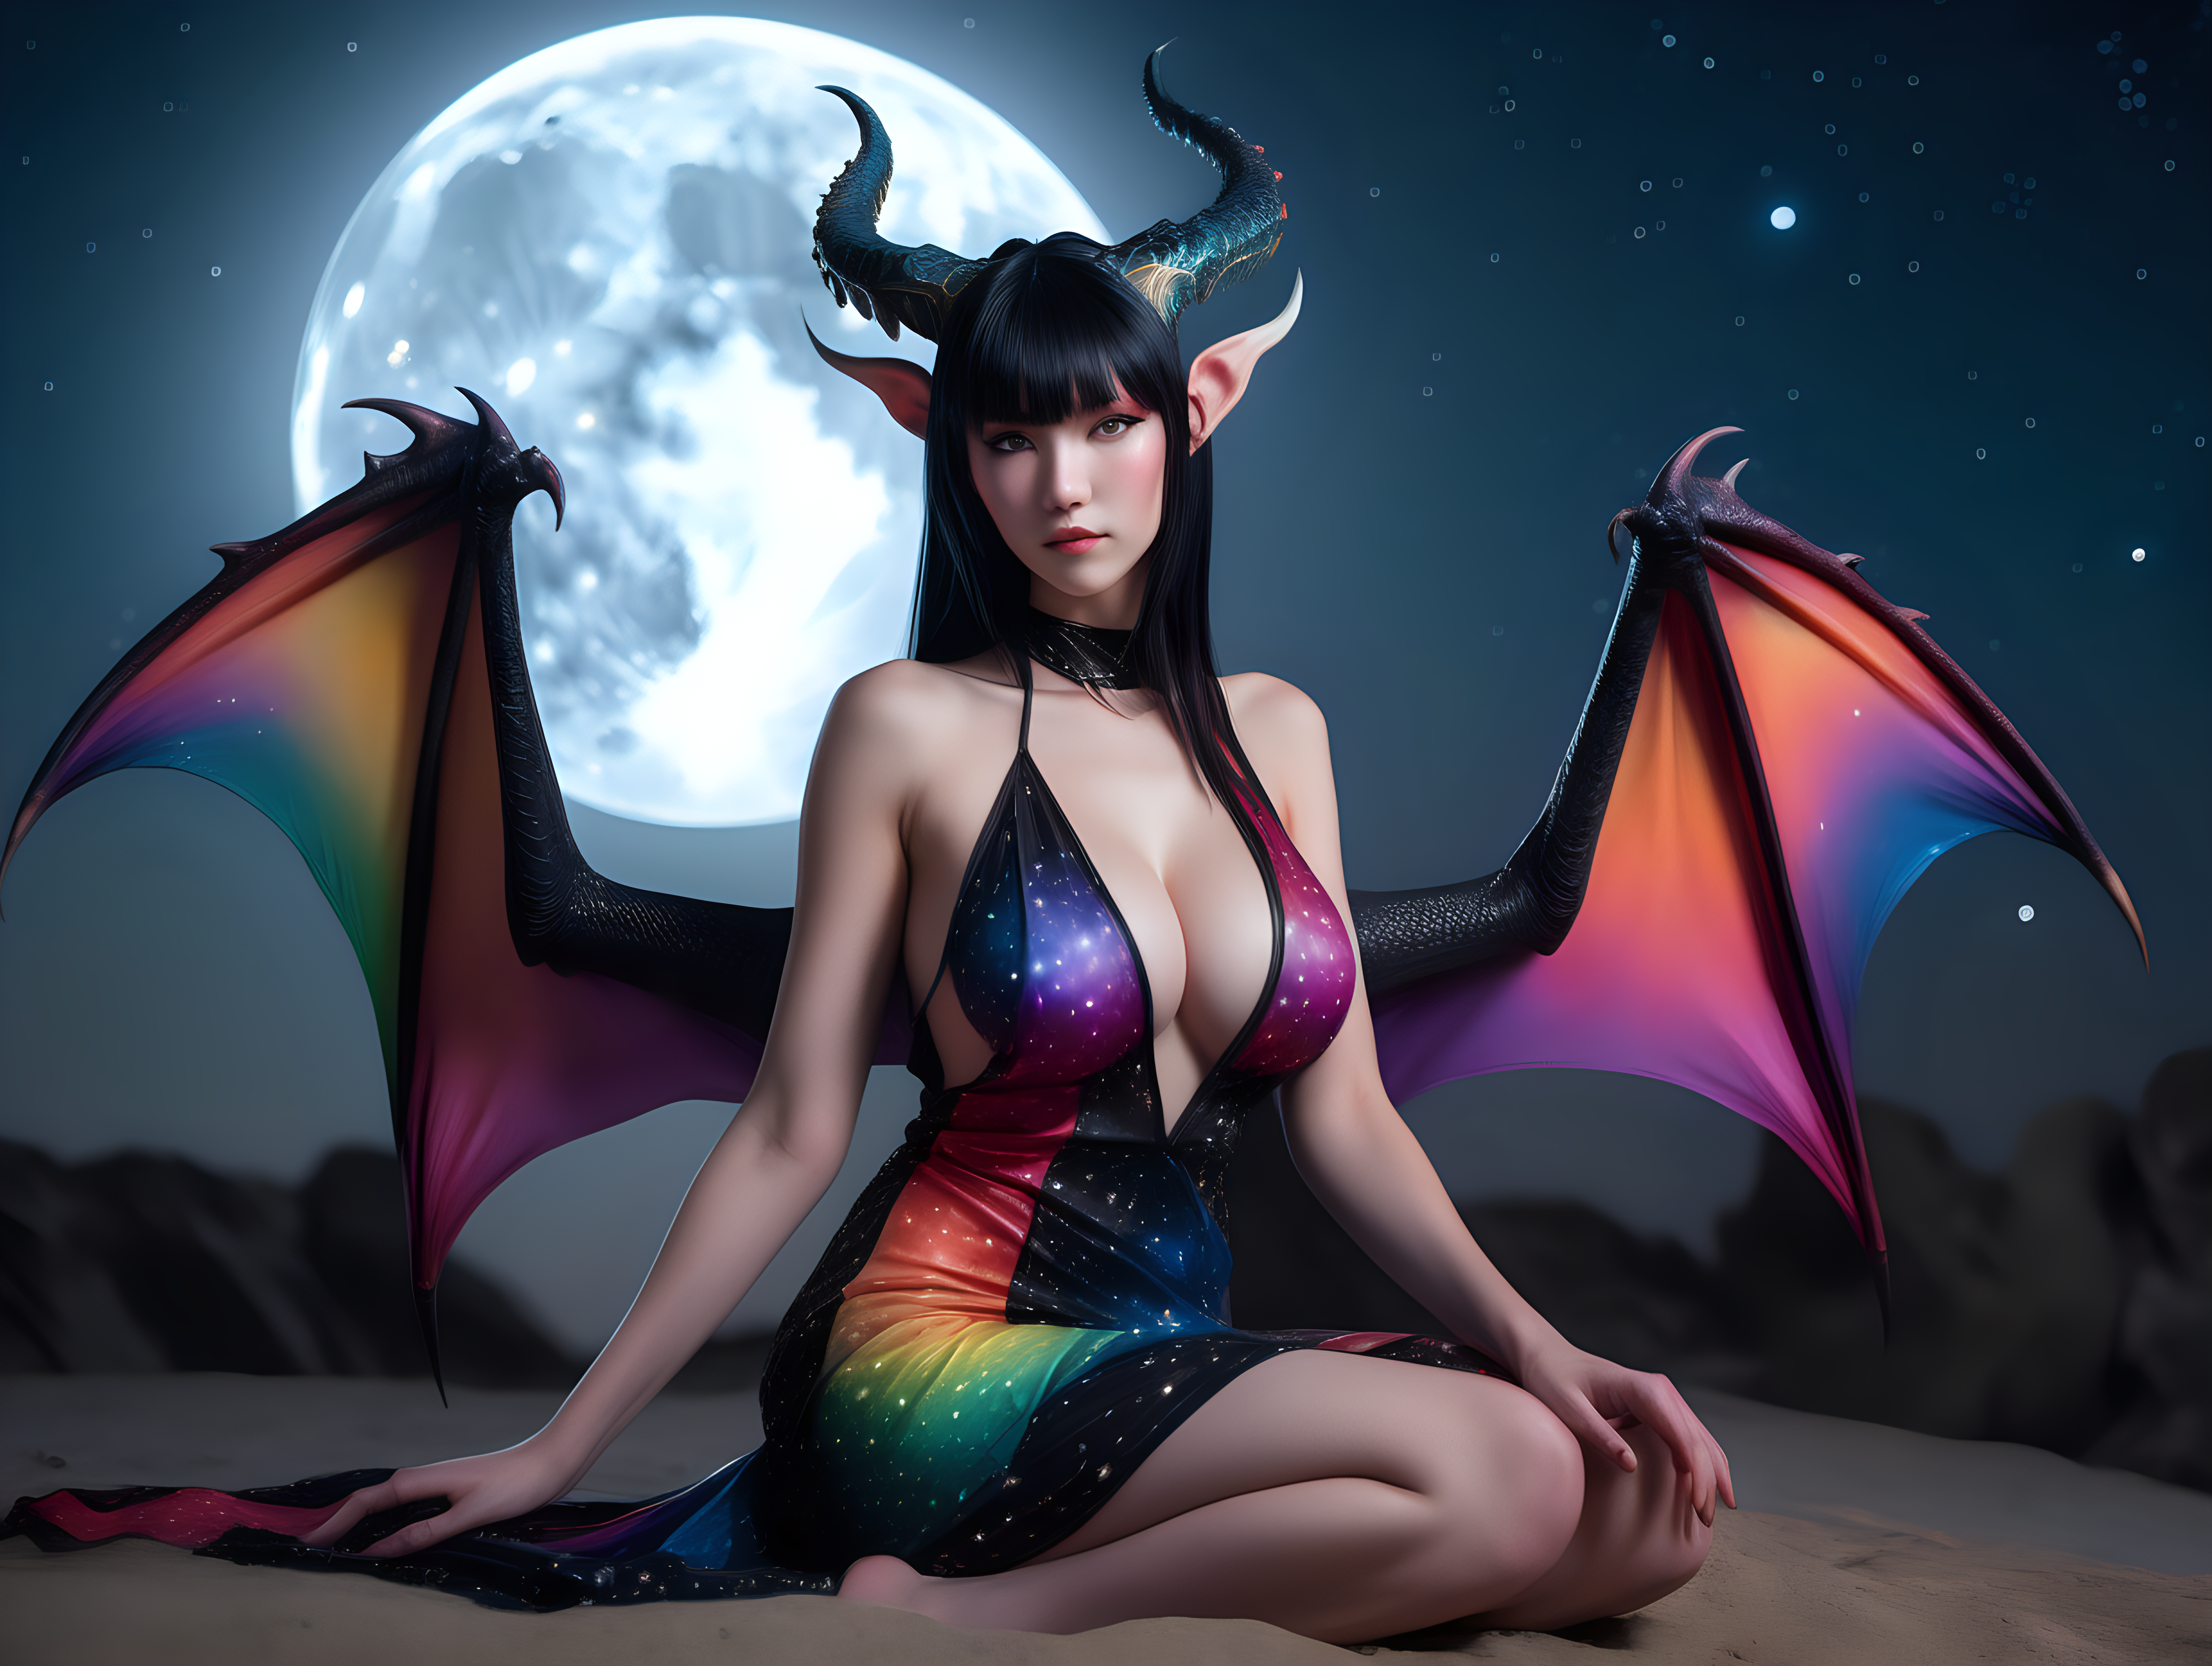 ultra-realistic high resolution and highly detailed close up adult film photoshoot of a slender female human dragon, with sleek pointy black horns gently swept straight backwards over head, with massive breasts, with a colourful open front loose transparent dress and draconic markings on arms and body, sitting under a starry sky with the moon in the background, looking at the camera